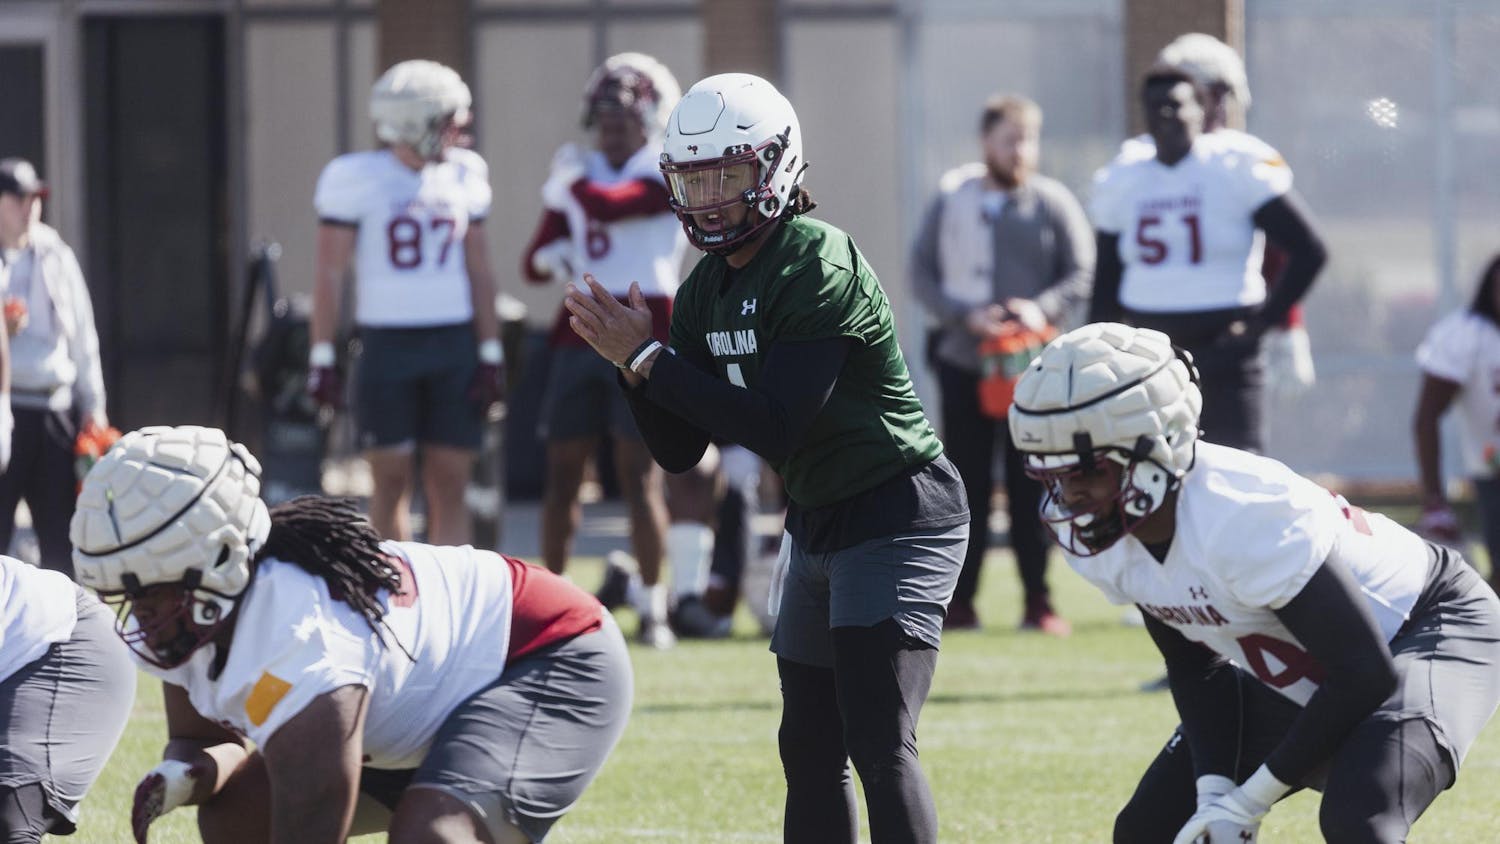 Redshirt senior quarterback Robby Ashford calls for the snap during one of the South Carolina football teams' spring practice sessions. Ashford, a recent transfer to South Carolina, has two years of eligibility remaining after completing stints with Oregon and Auburn.